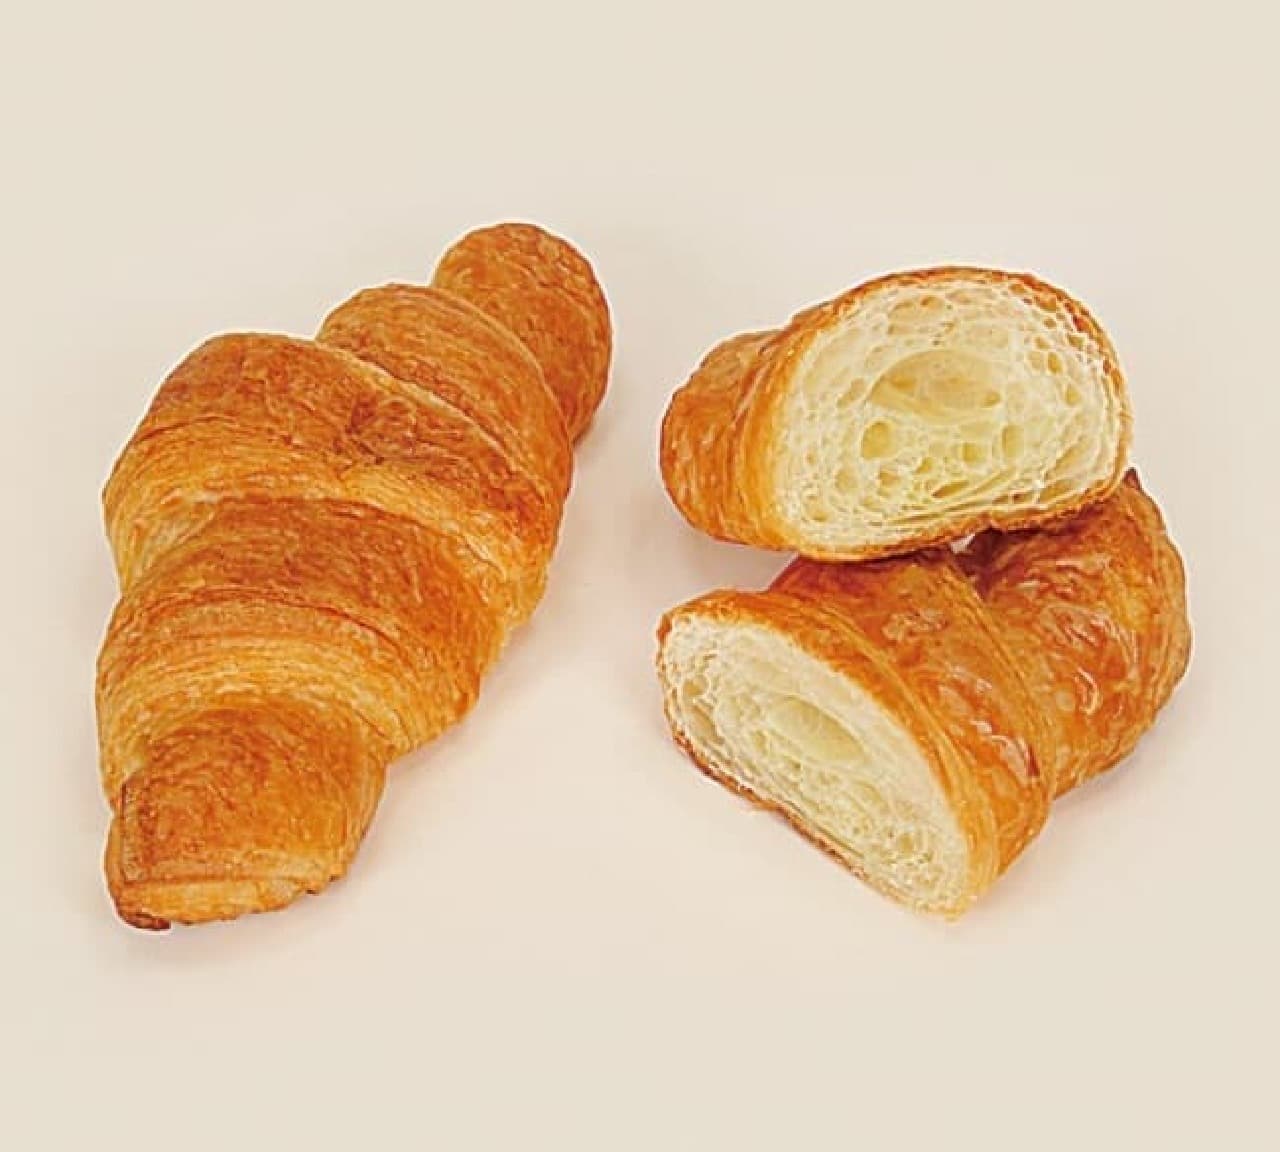 Limited to FamilyMart in Shikoku "Crispy croissants baked in the oven"